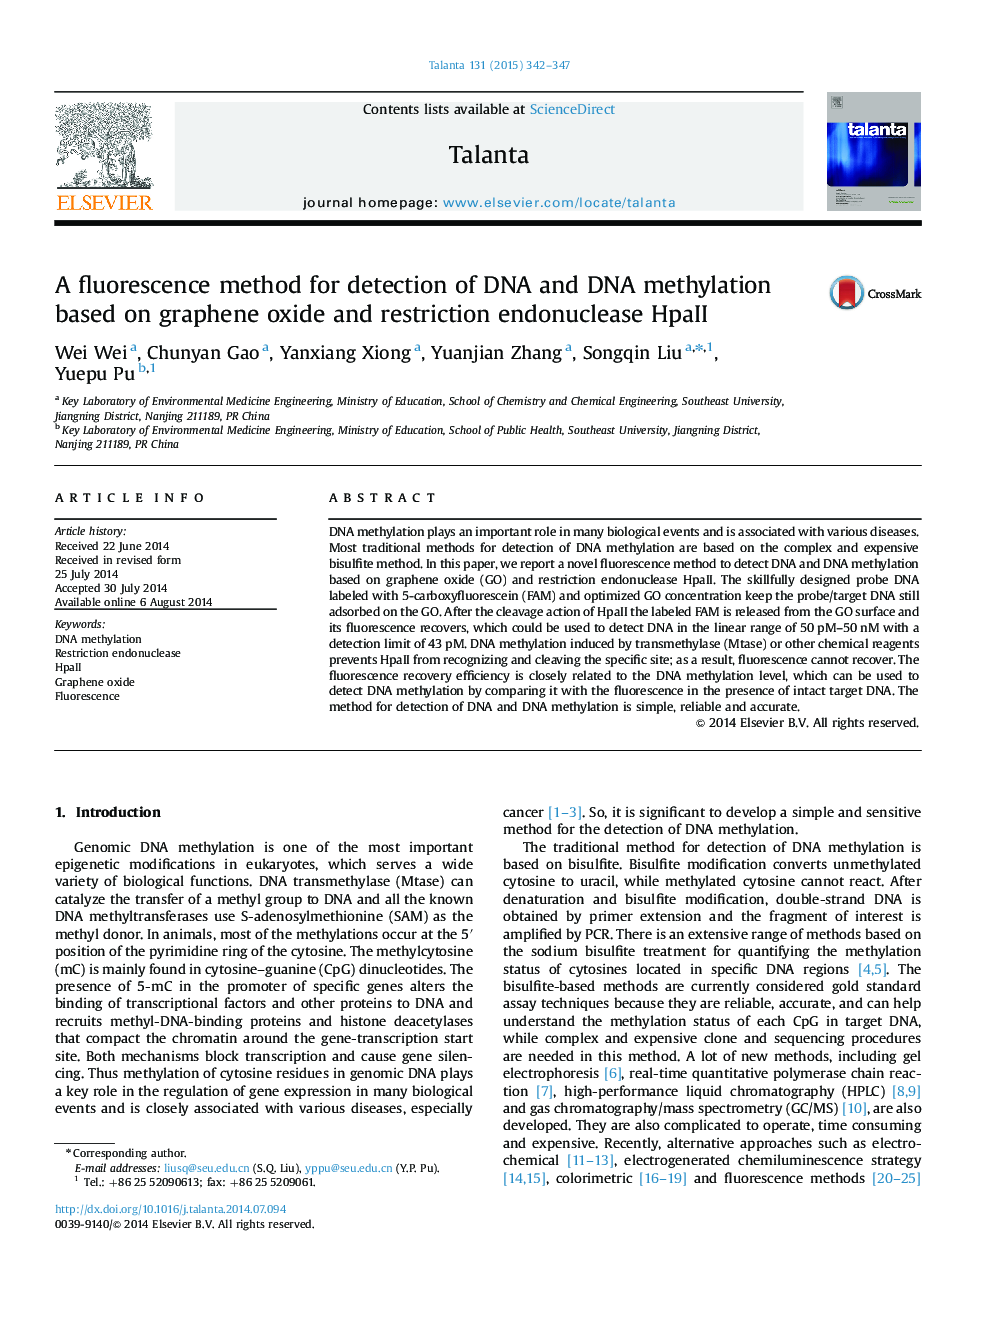 A fluorescence method for detection of DNA and DNA methylation based on graphene oxide and restriction endonuclease HpaII